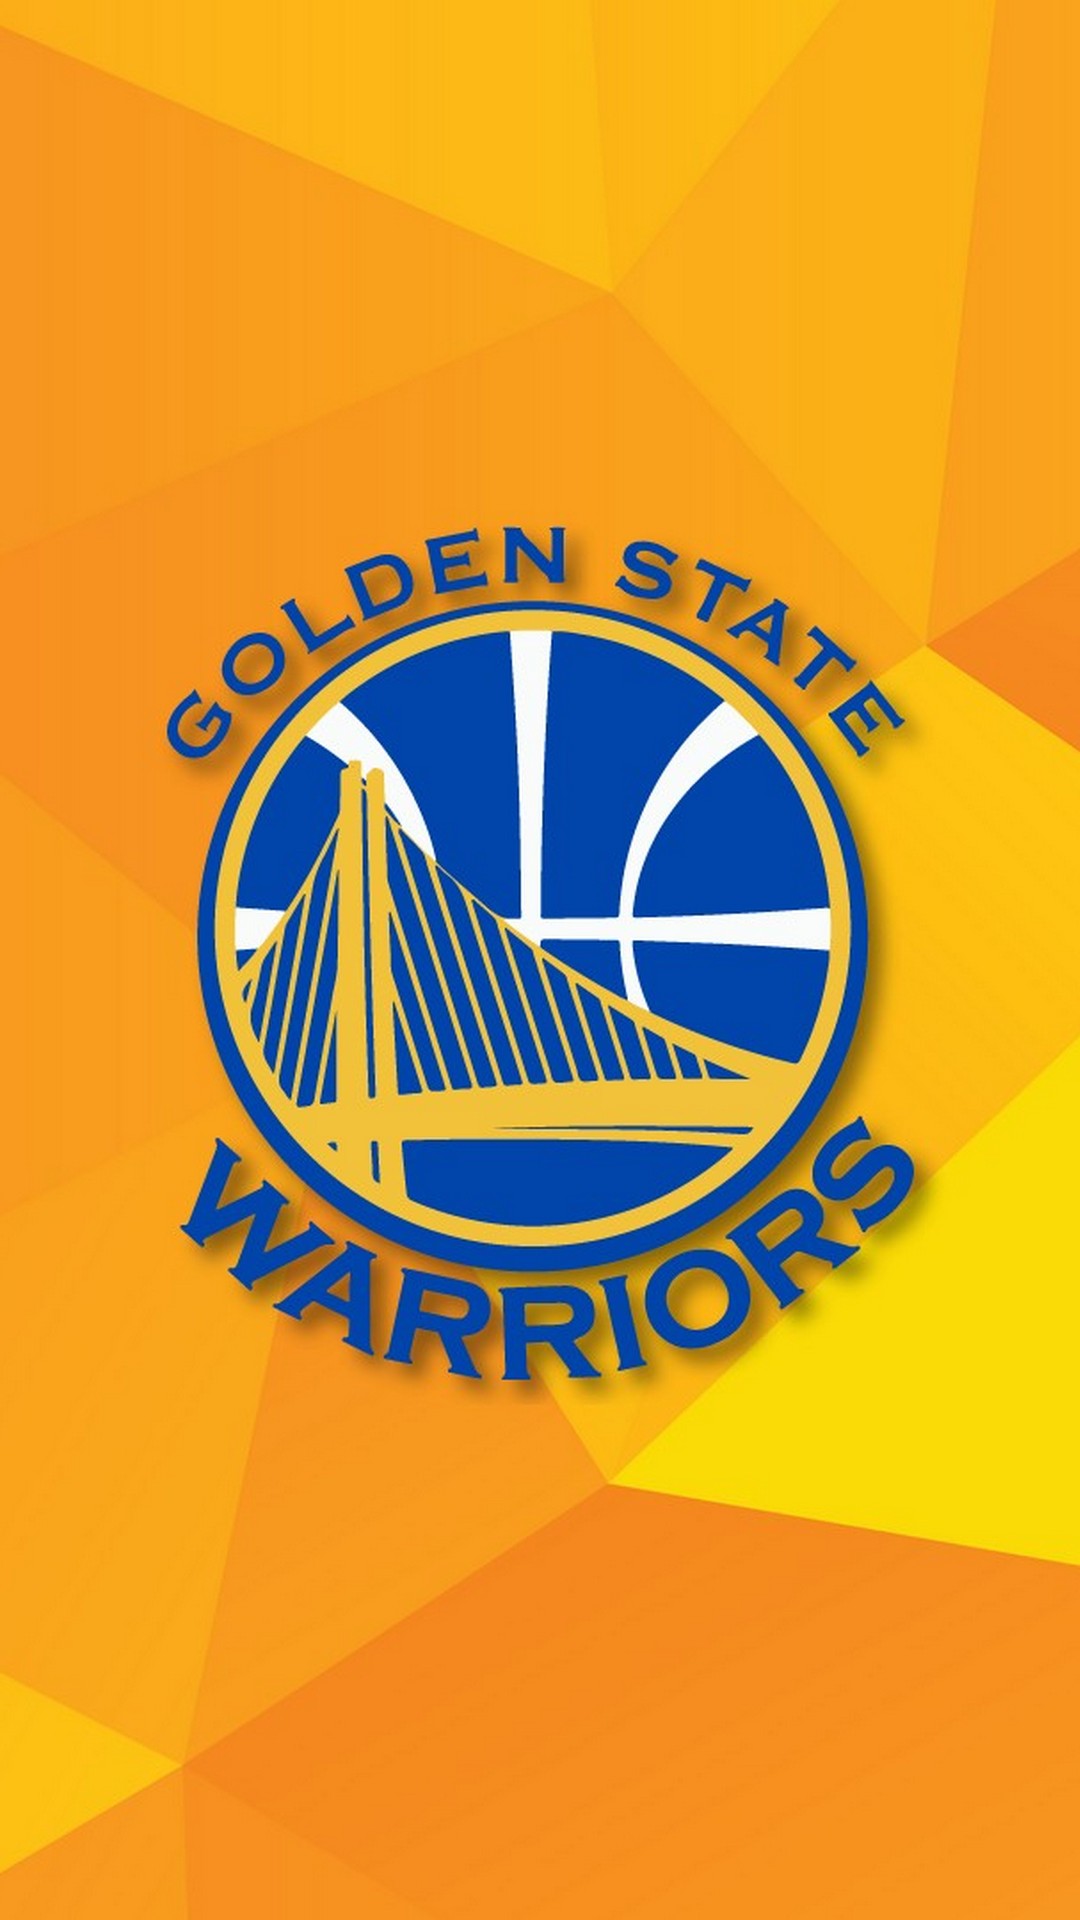 Golden State Warriors Backgrounds For Mobile with image dimensions 1080X1920 pixel. You can make this wallpaper for your Desktop Computer Backgrounds, Windows or Mac Screensavers, iPhone Lock screen, Tablet or Android and another Mobile Phone device